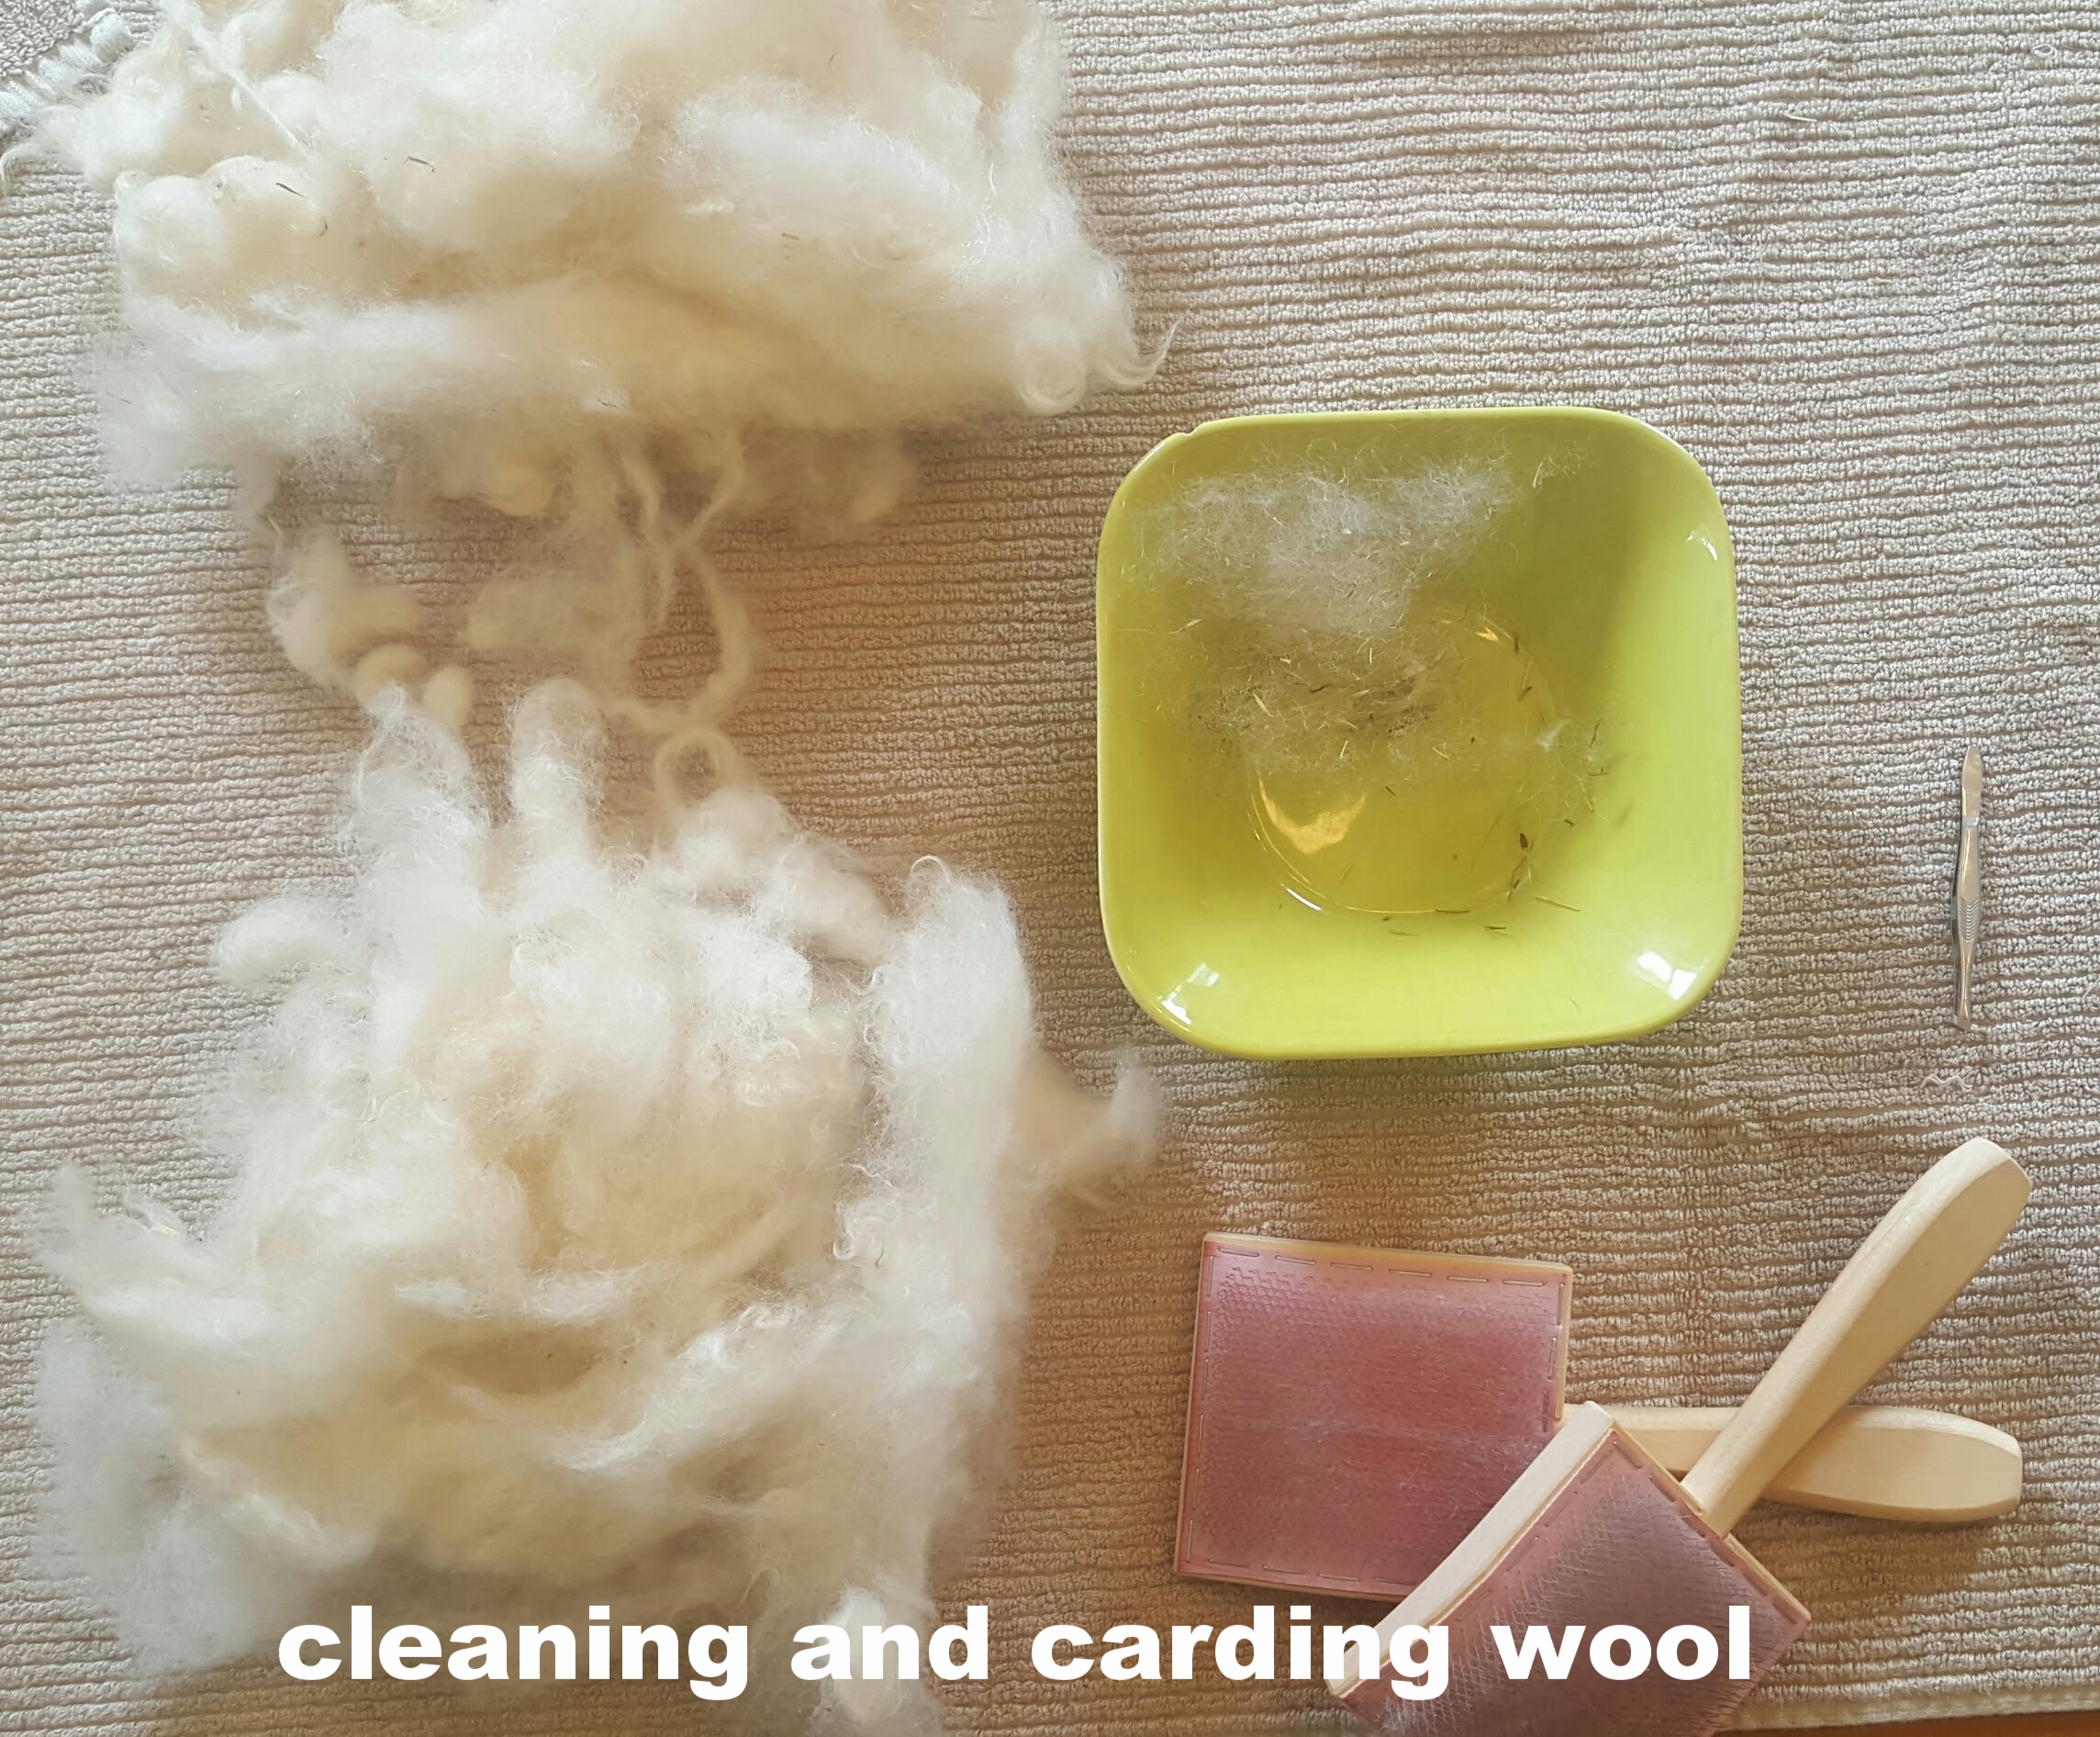 Picking and carding wool